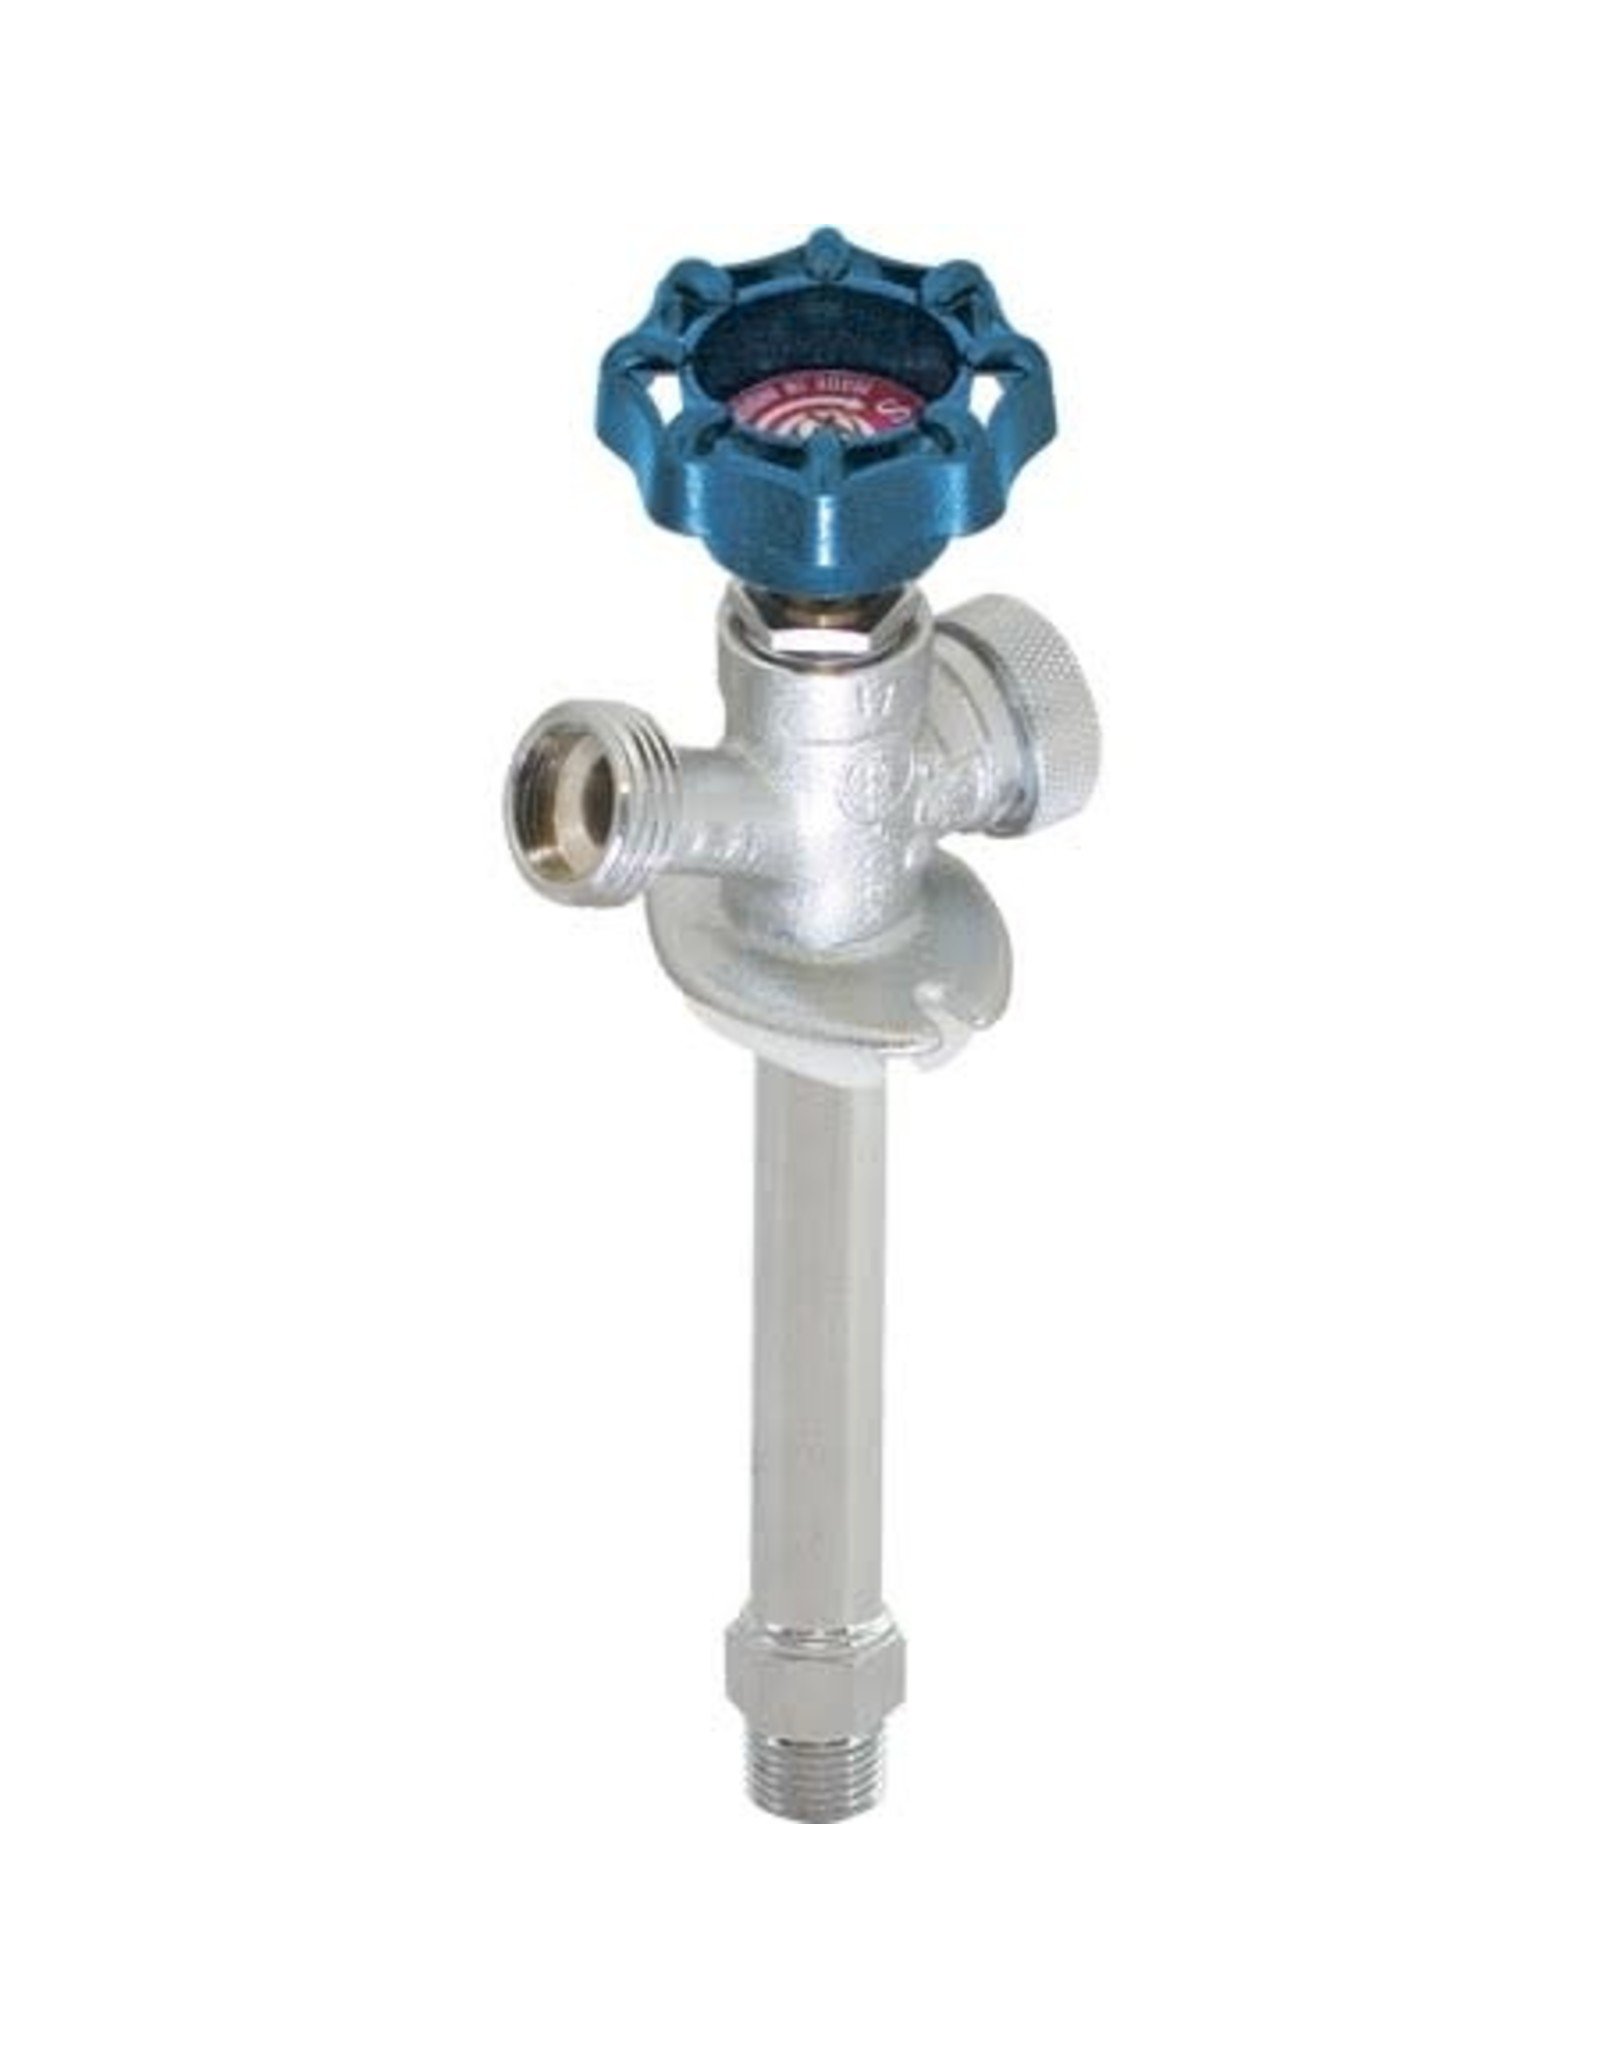 FROST FREE FAUCET WITH VACUUM BREAKER